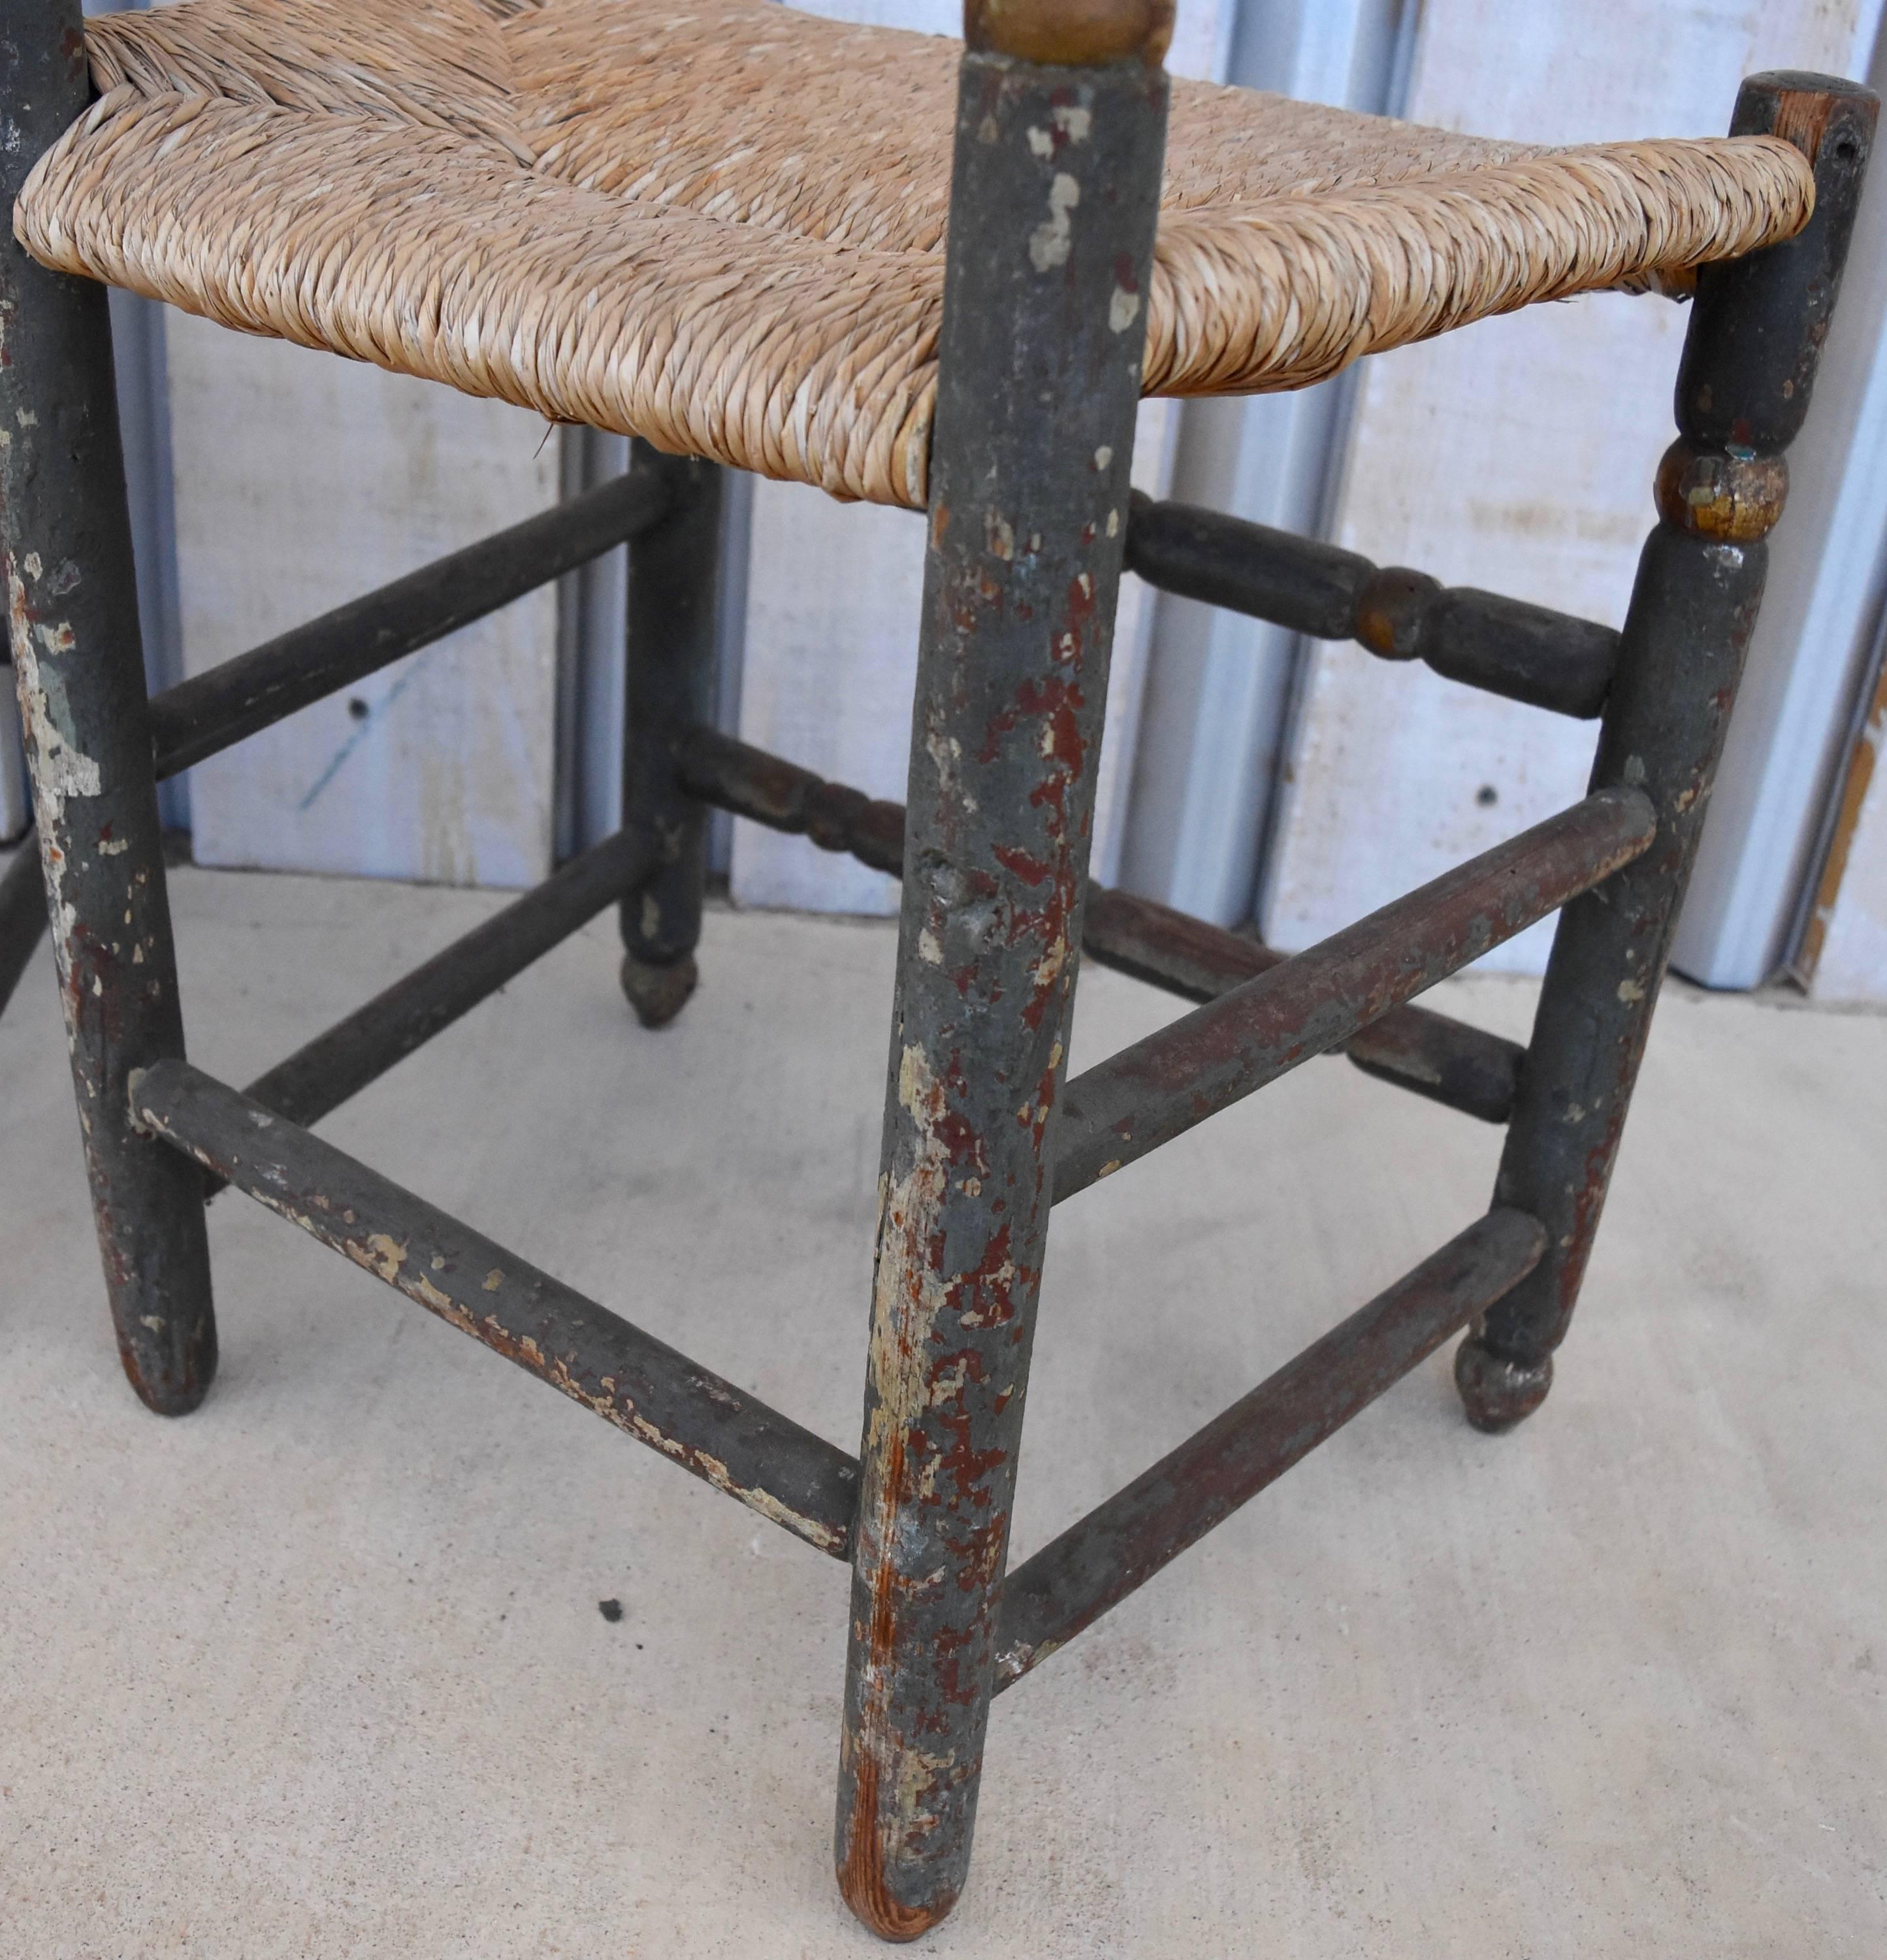 These set of six Italian chairs have the most beautiful teal paint I have ever had. You can see how richly worn the patina is in places and the rush seats are all in excellent condition. They are from the 19th century and have hints of gold gilt on